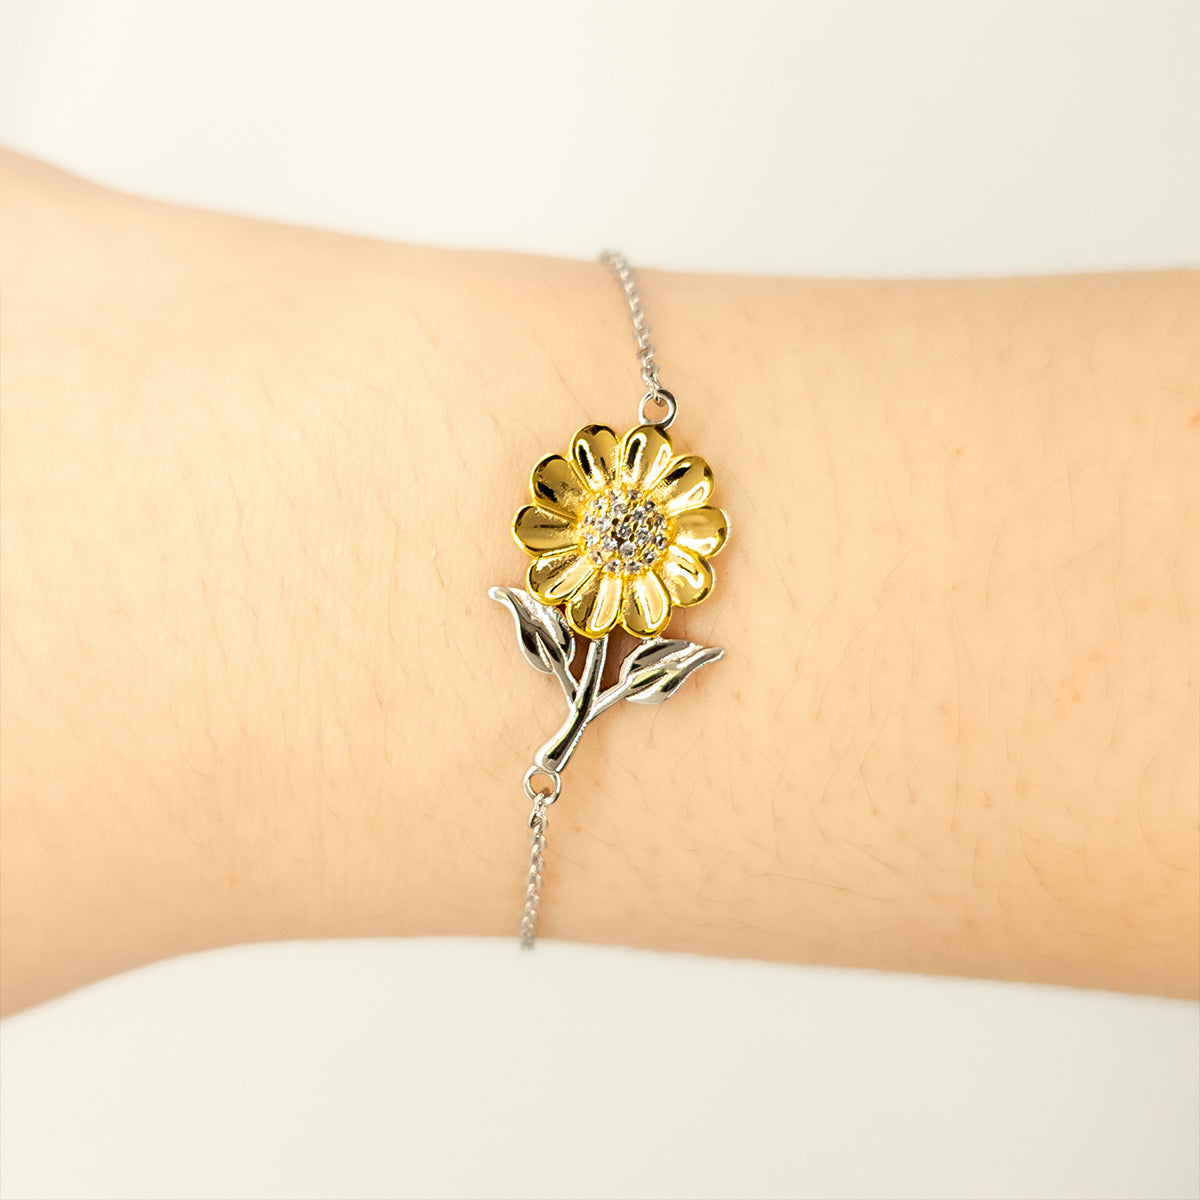 Sunflower Bracelet for Nephew - Perfect Love Casteth Out Fear - Inspirational Gift for Birthday, Christmas, and Graduation - Engraved Confidence and Hope for Nephew